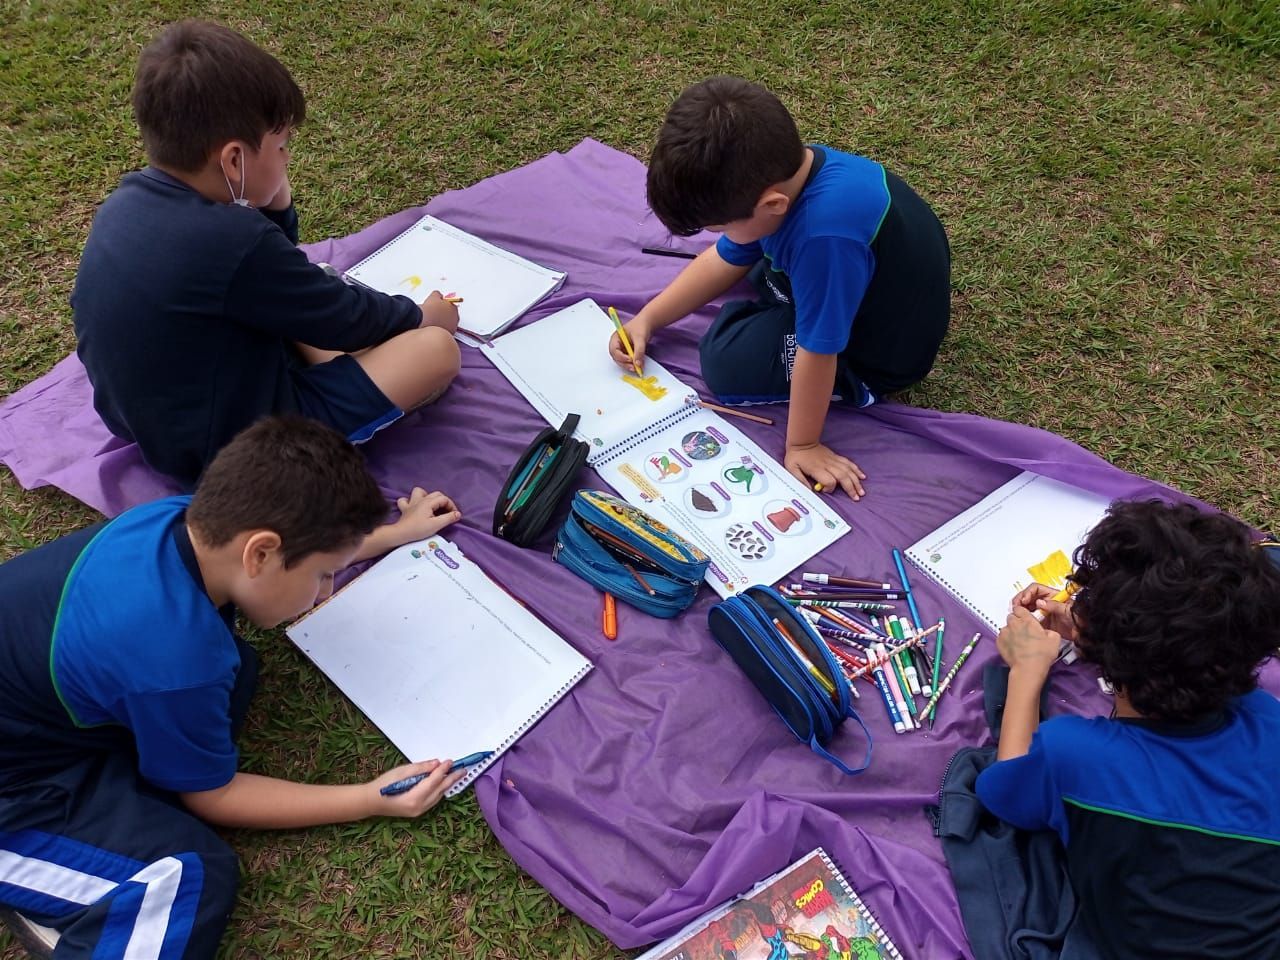 Four young boys sitting outside together creating art with different marker colors. 